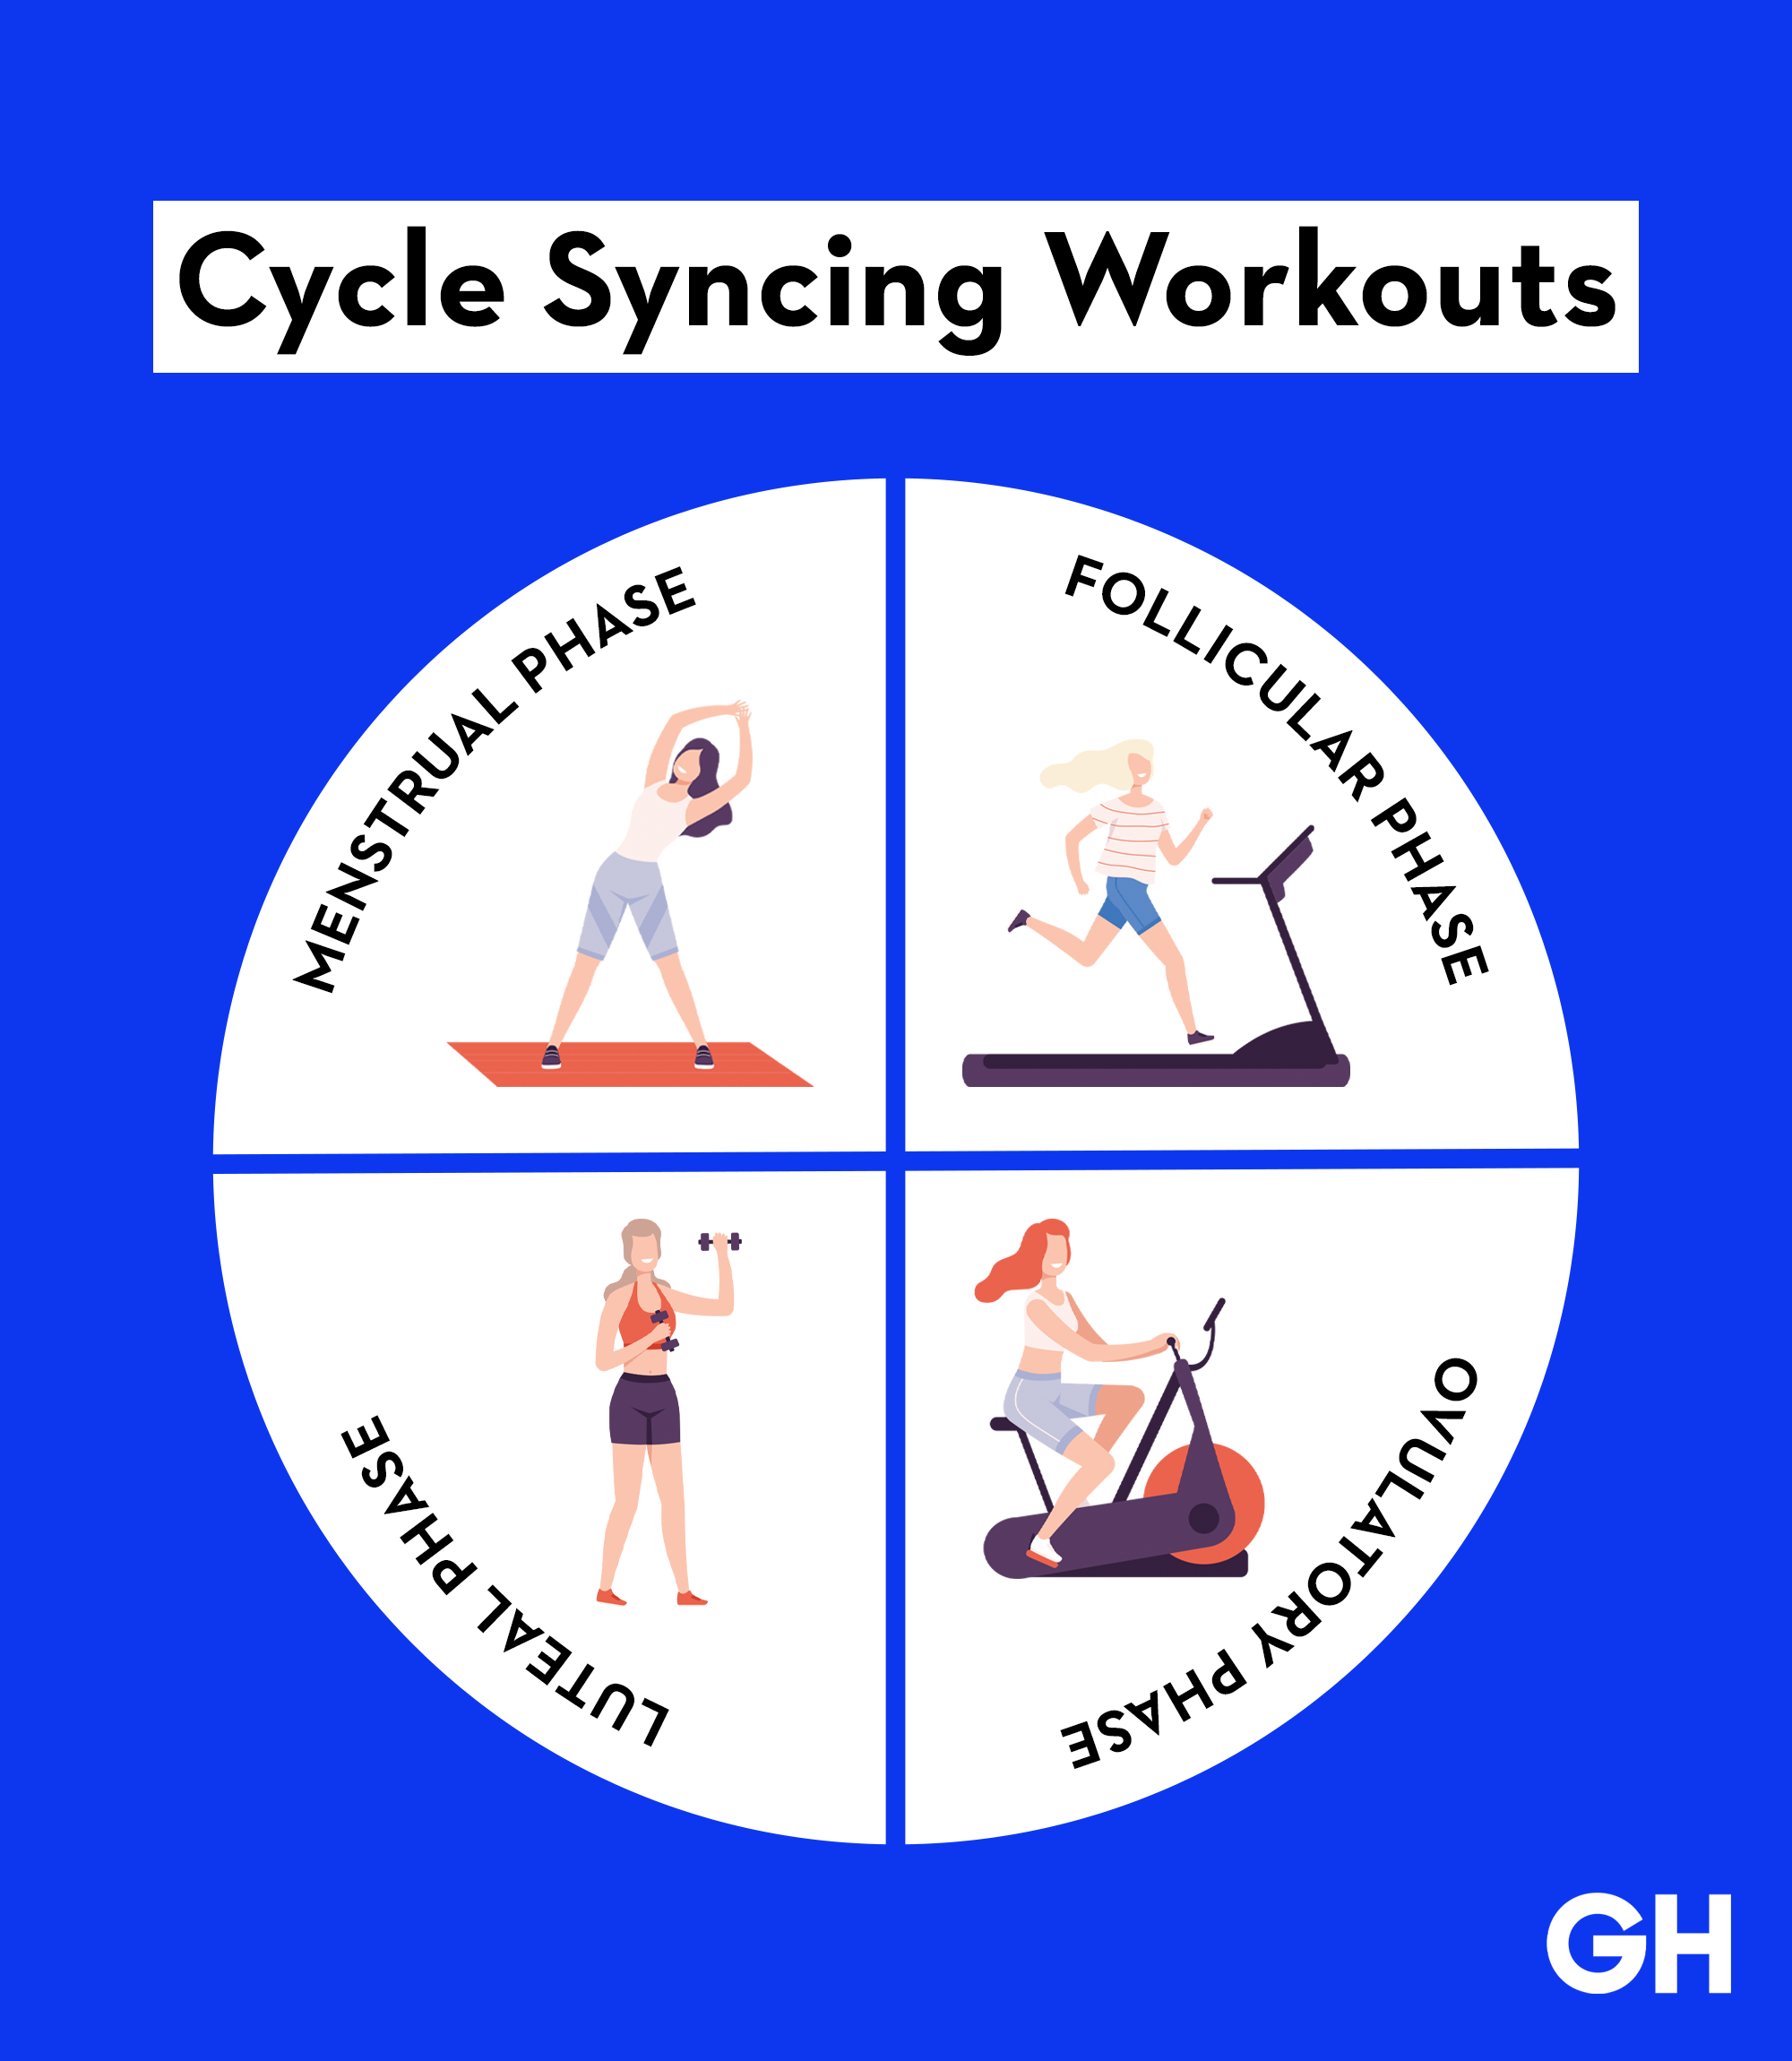 Cycle Syncing Fitness: Specific Exercises And Benefits